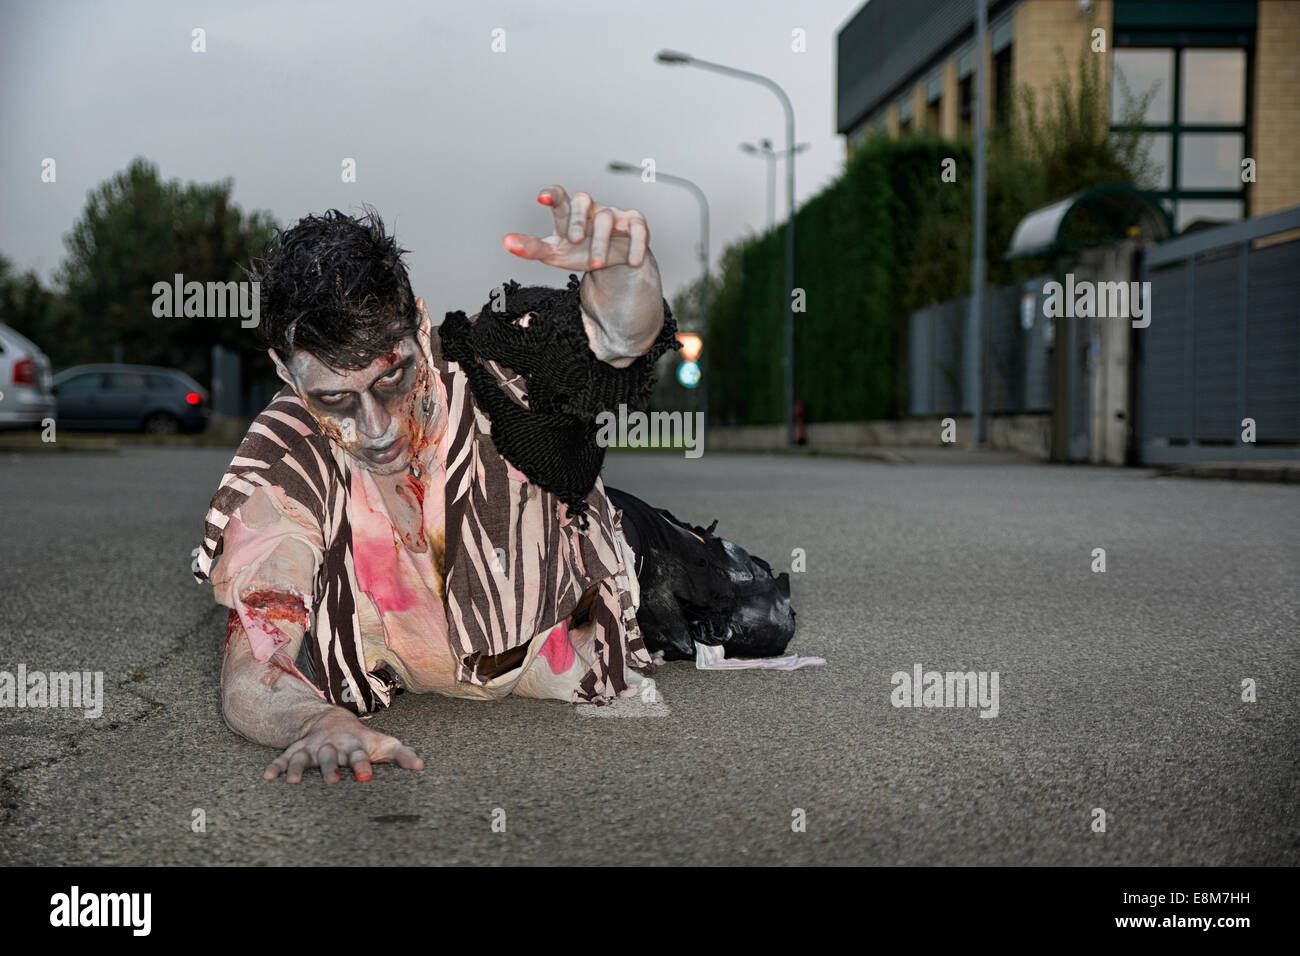 Male zombie crawling on his knees, on empty city street, looking at camera reaching out one hand. Halloween theme Stock Photo